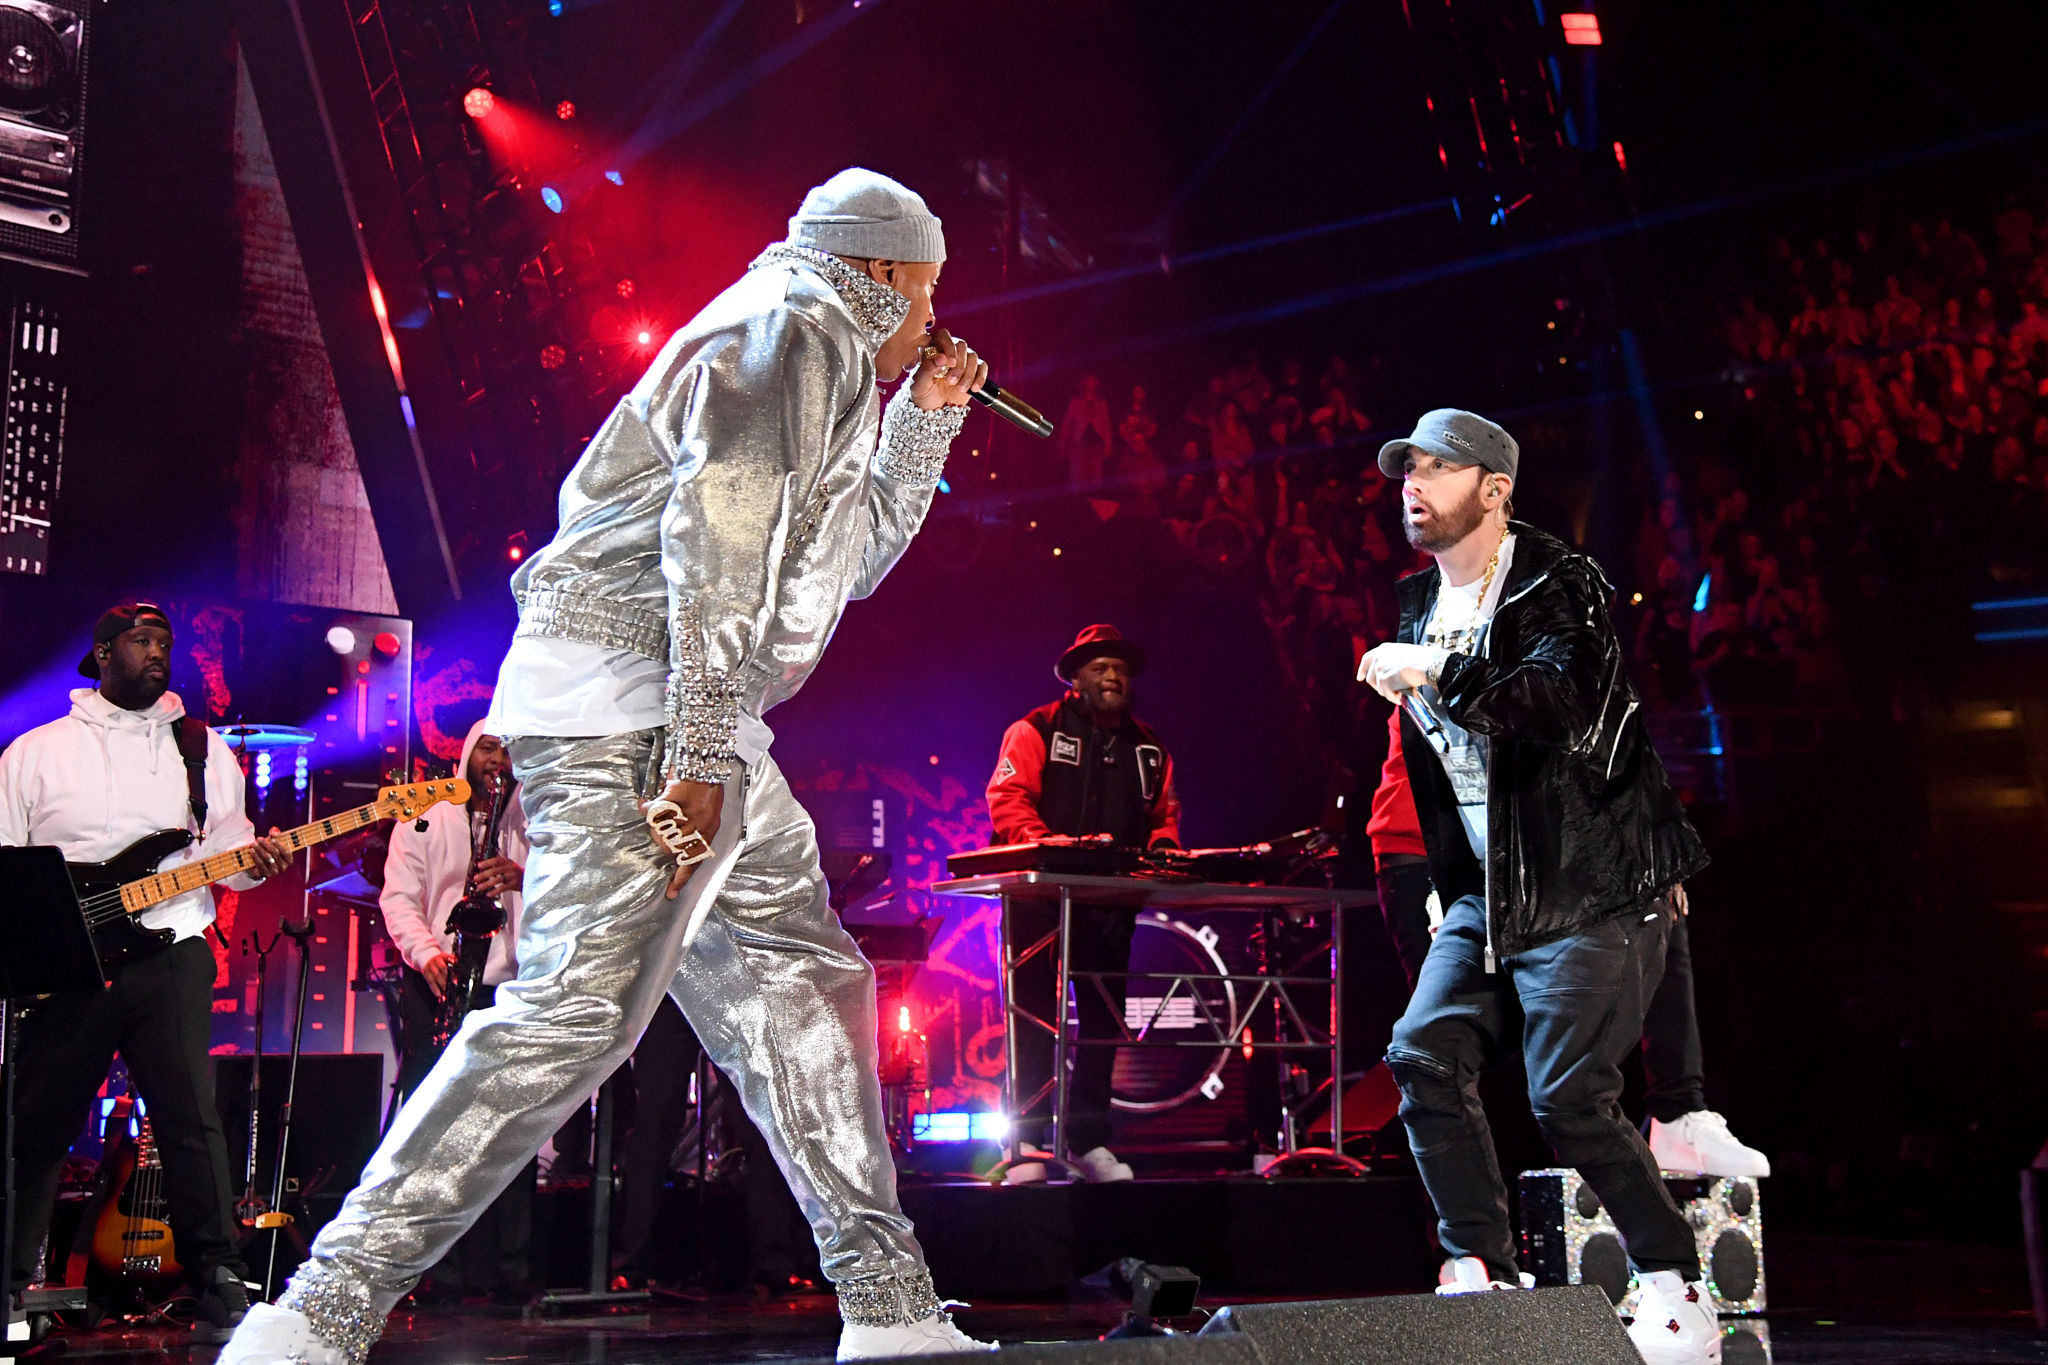 CLEVELAND, OHIO - OCTOBER 30: LL Cool J and Eminem performs onstage during the 36th Annual Rock & Roll Hall Of Fame Induction Ceremony at Rocket Mortgage Fieldhouse on October 30, 2021 in Cleveland, Ohio. (Photo by Kevin Mazur/Getty Images for The Rock and Roll Hall of Fame )